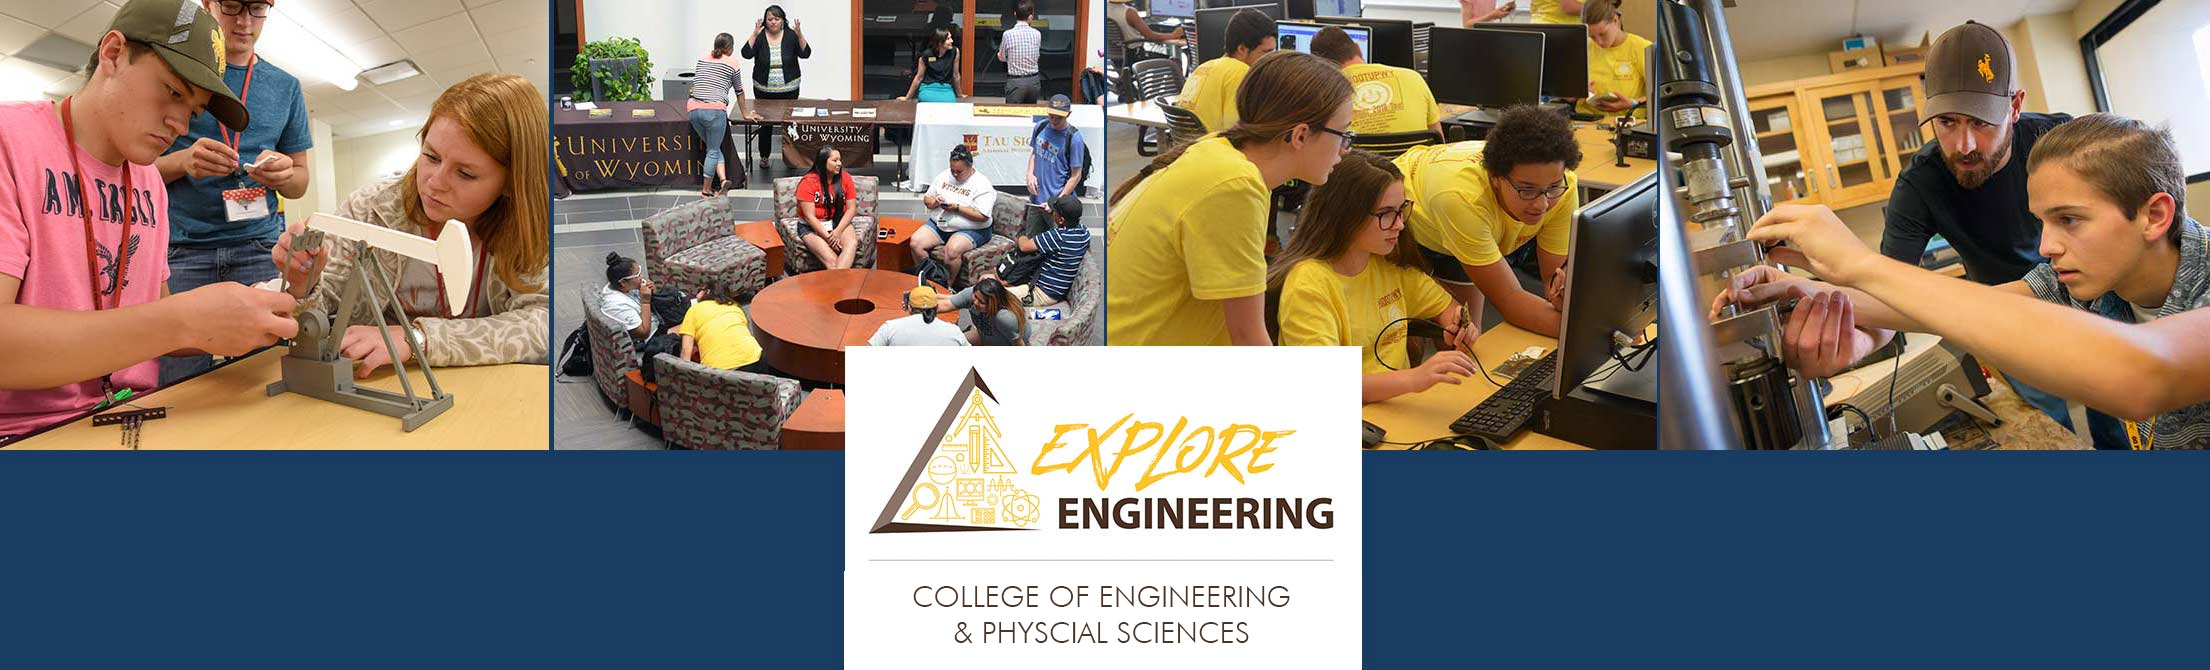 College of Engineering and Physical Sciences logo and student photos